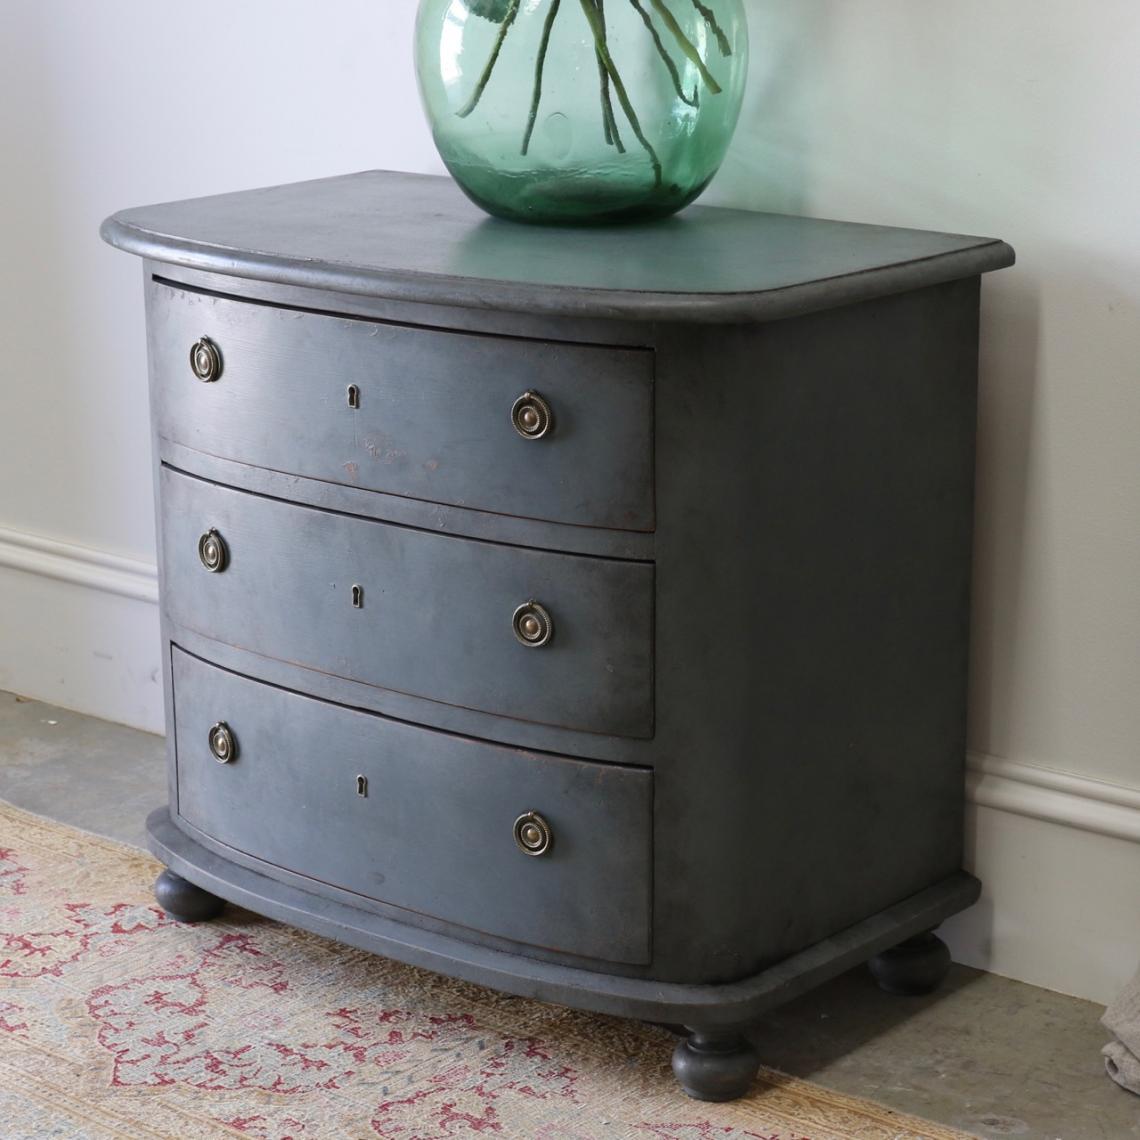 Bow-front Chest of Drawers